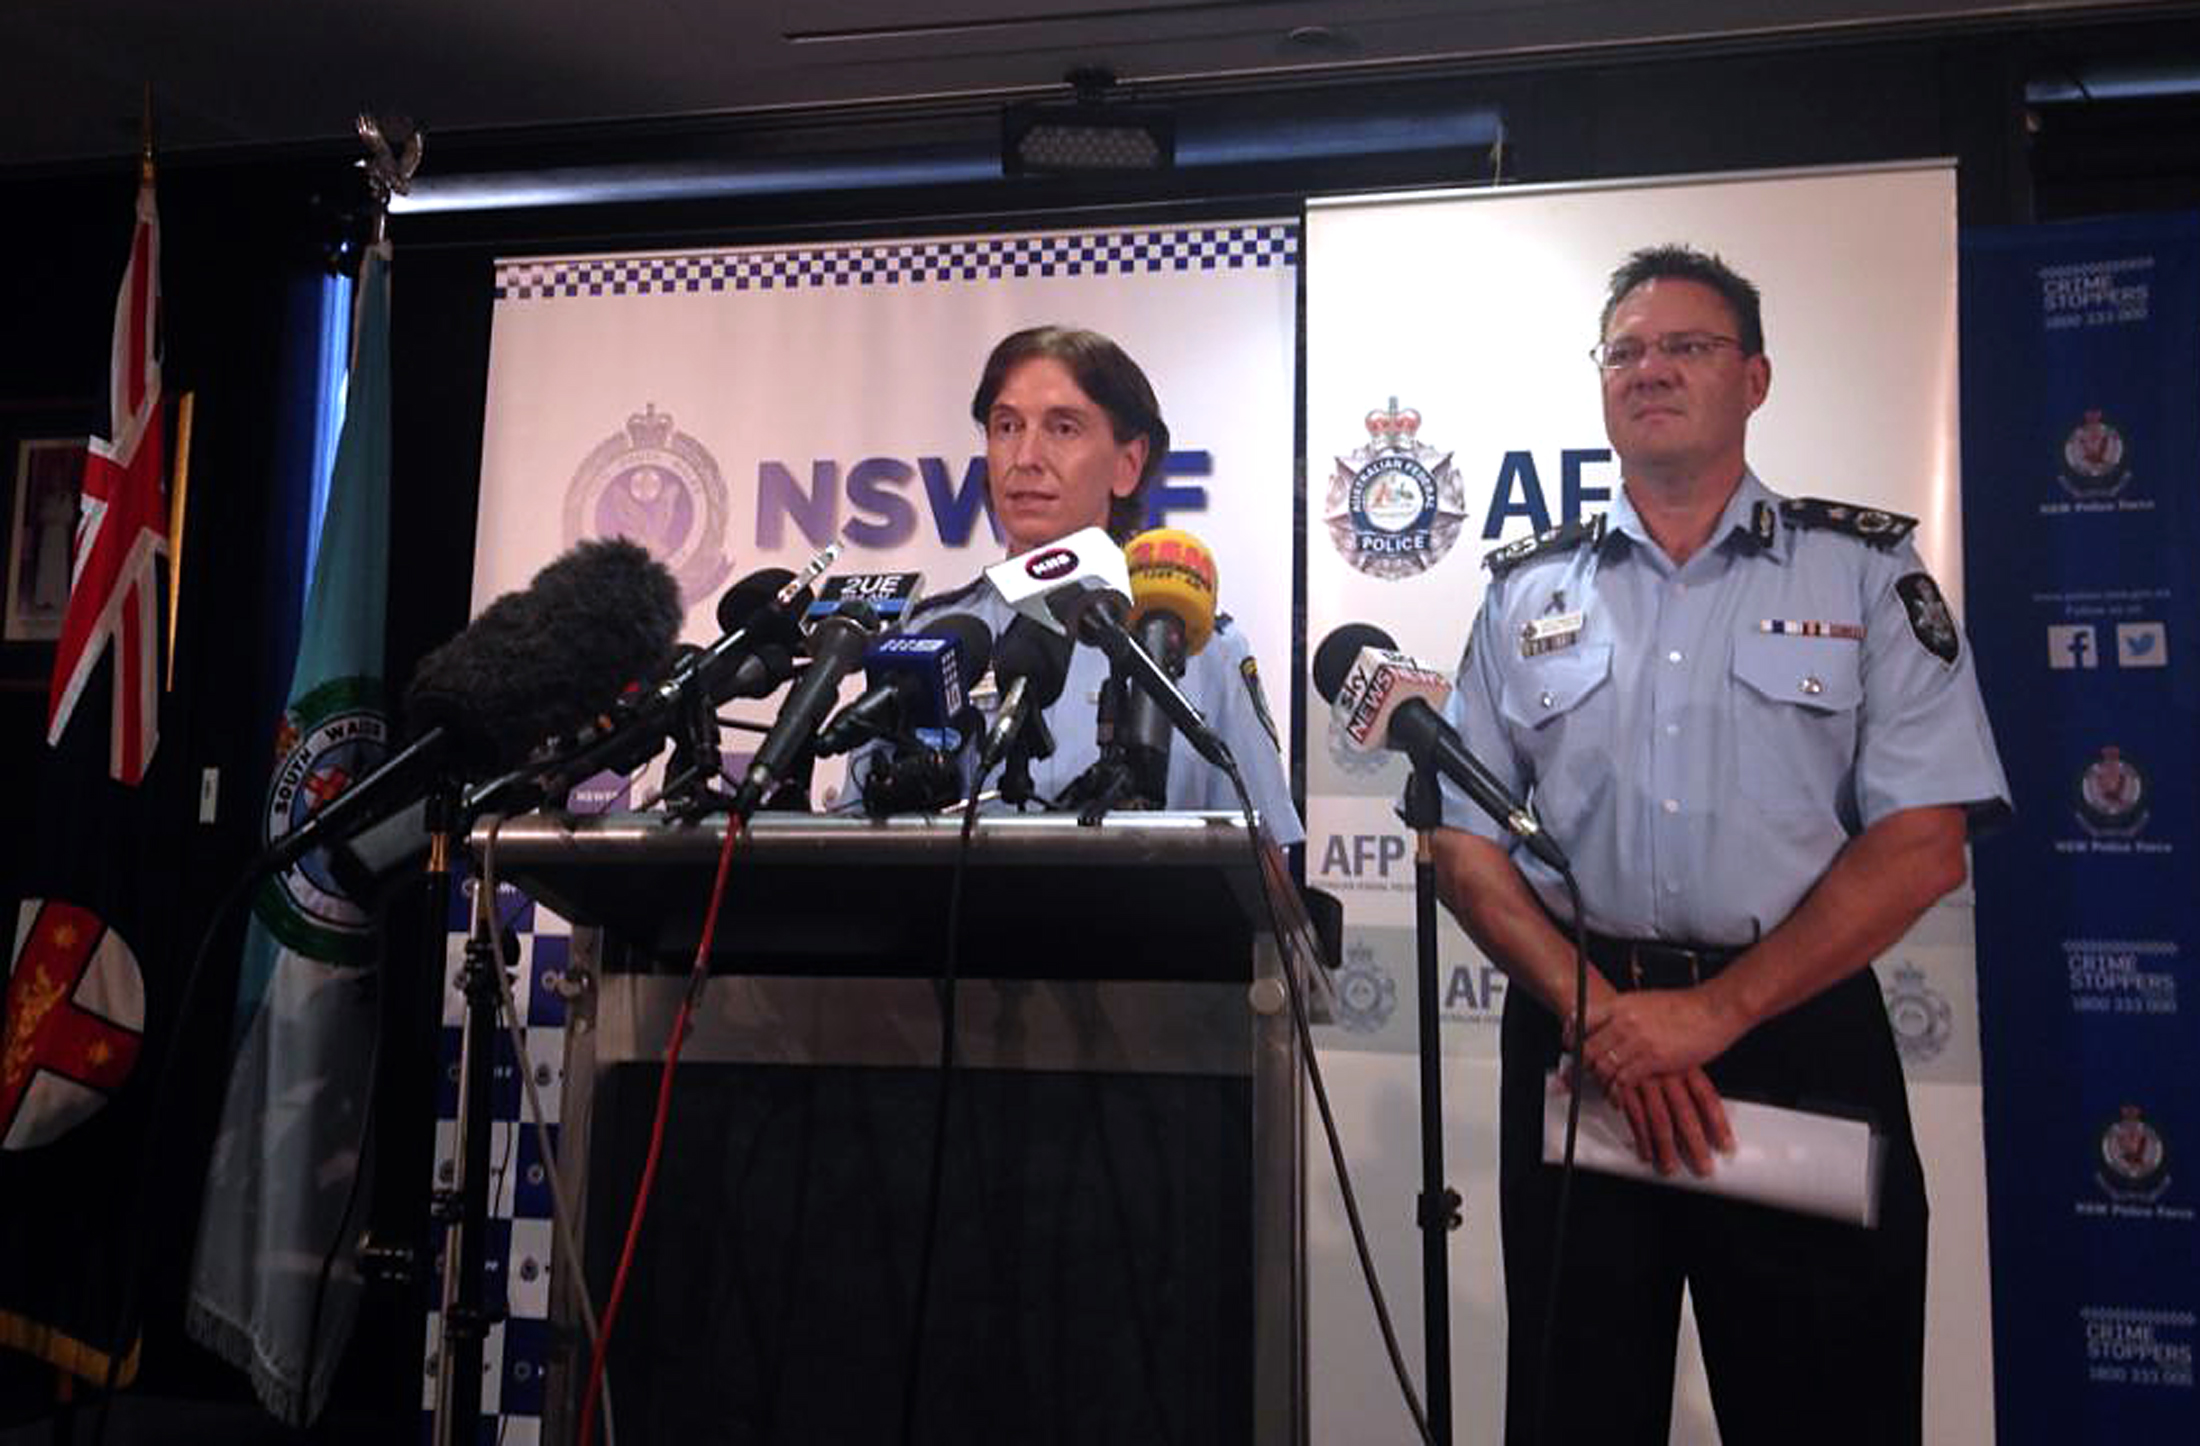 Australian Federal Police Deputy Commissioner Michael Phelan (R) listens as New South Wales Deputy Police Commissioner Catherine Burn speaks during a media conference in Sydney February 11, 2015